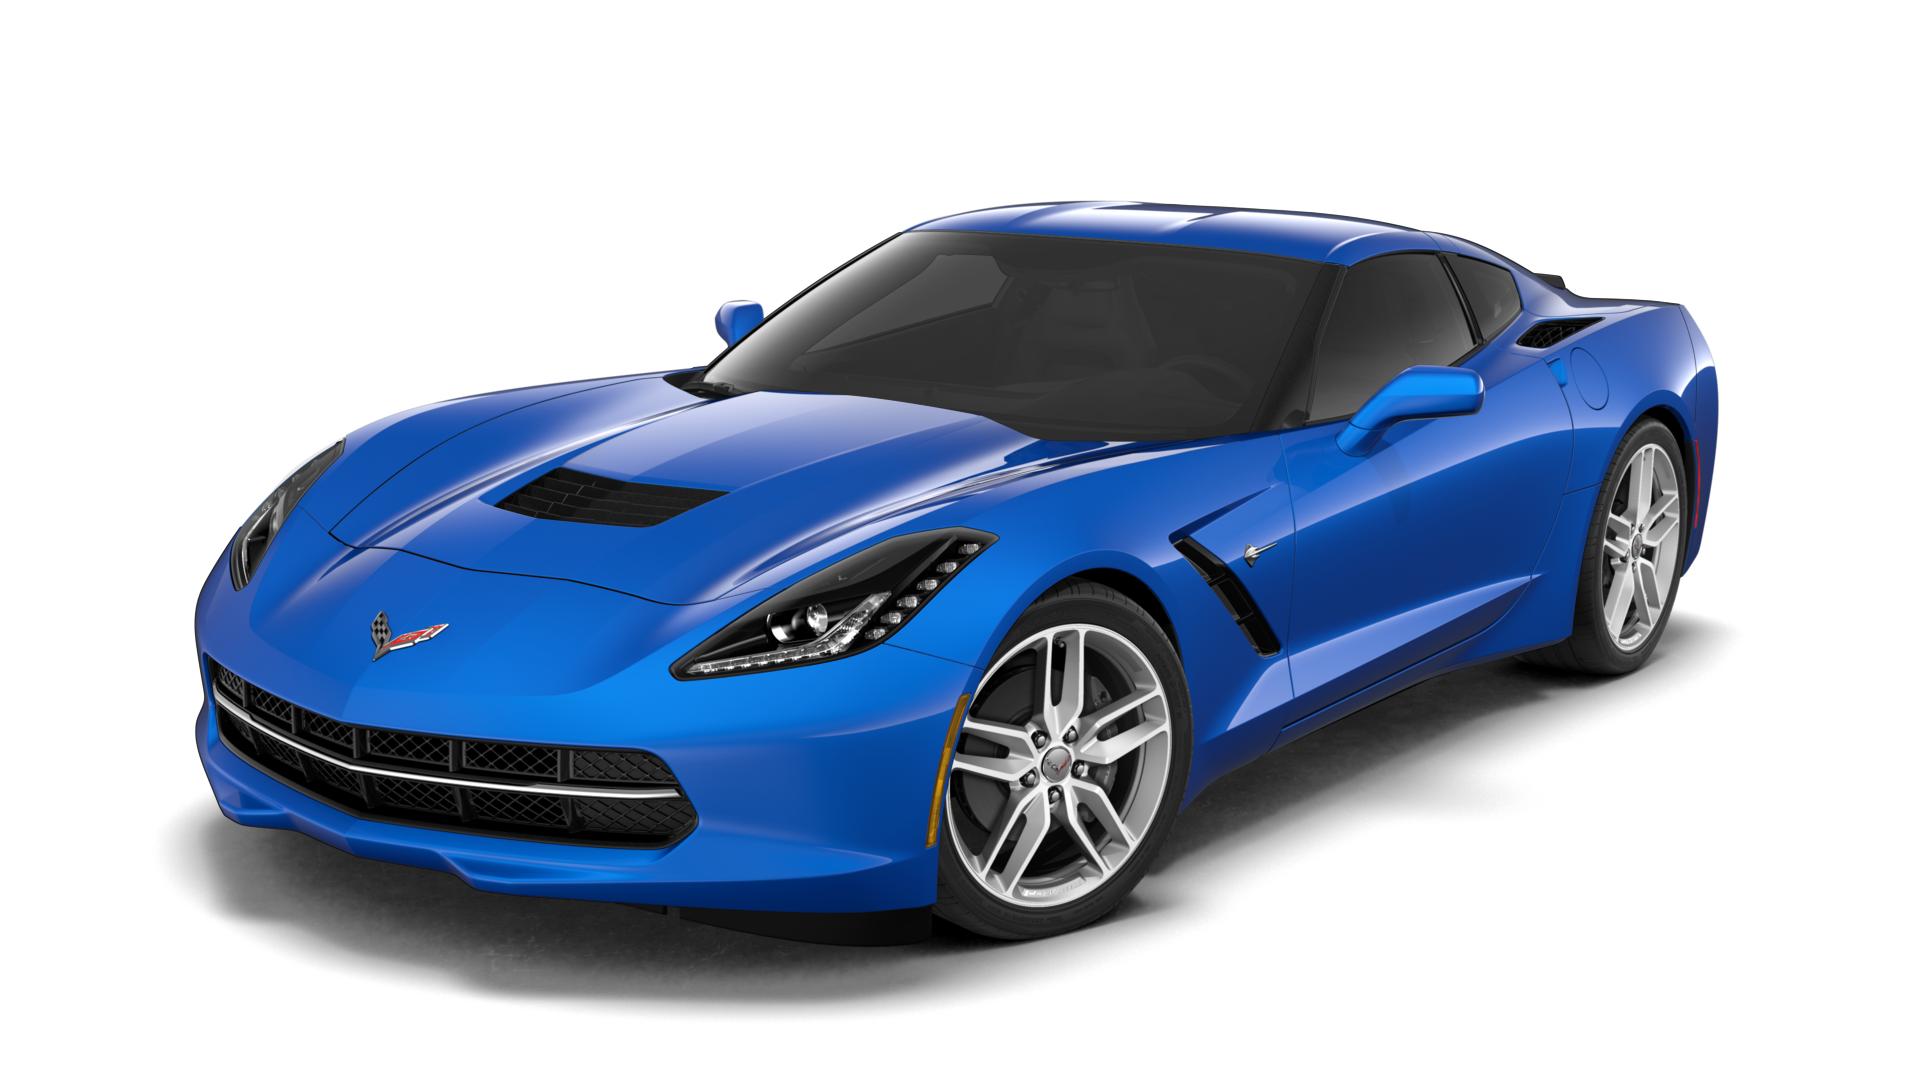 Check Out The New Elkhart Lake Blue Metallic Color On The 2019 Corvette.